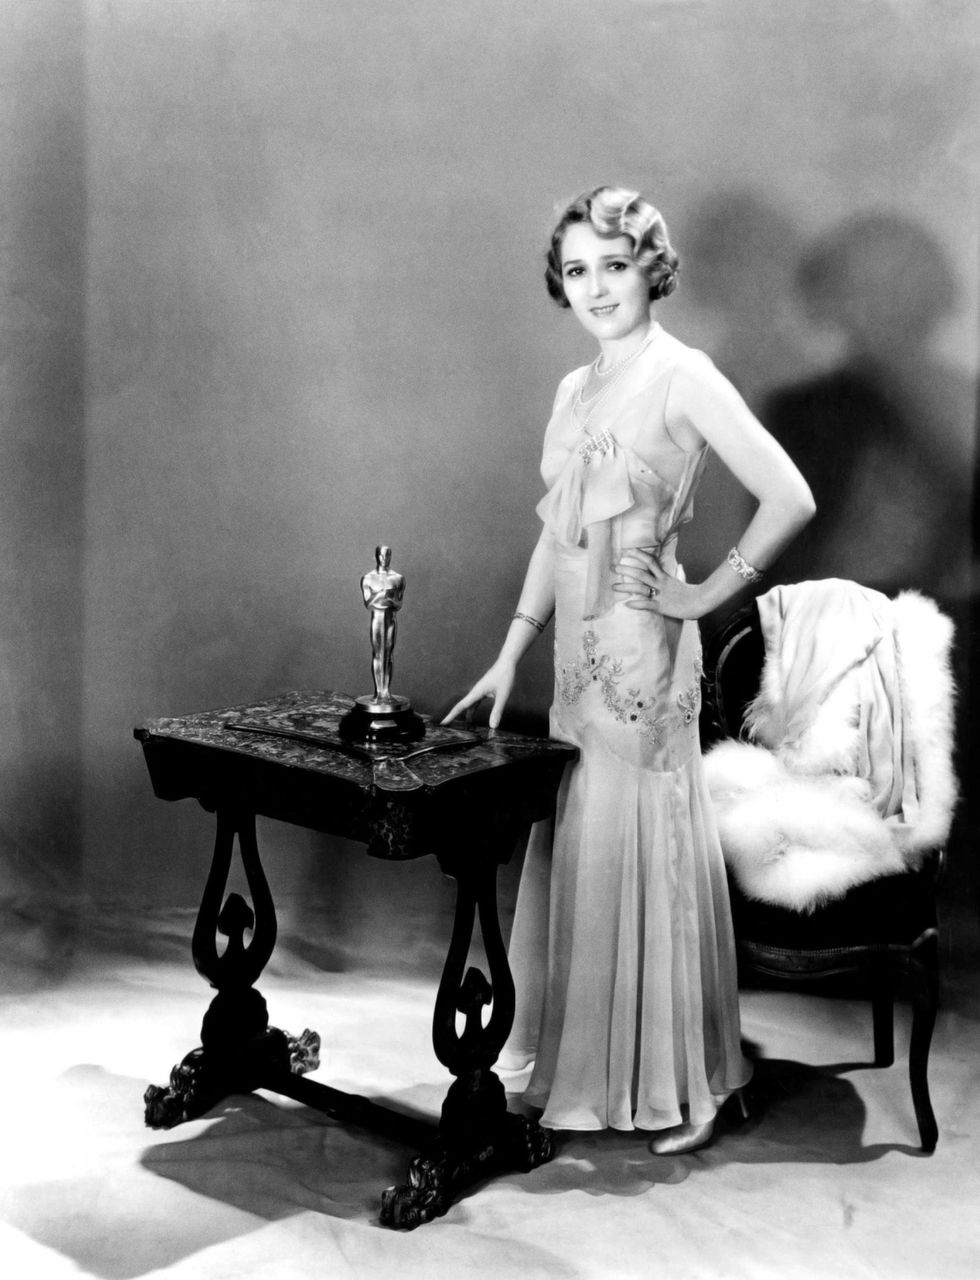 <p>As the Academy of Motion Picture Arts and Sciences gained traction, it was decided that two ceremonies would be held in 1930—one in spring, one in fall—to catch up with current crop of films.&nbsp;At the April event, Mary Pickford won Best Actress for <i data-redactor-tag="i">Coquette</i>.&nbsp; Pickford had been acting since age 8, and had been in motion pictures since 1909.<span class="redactor-invisible-space" data-verified="redactor" data-redactor-tag="span" data-redactor-class="redactor-invisible-space"></span></p>